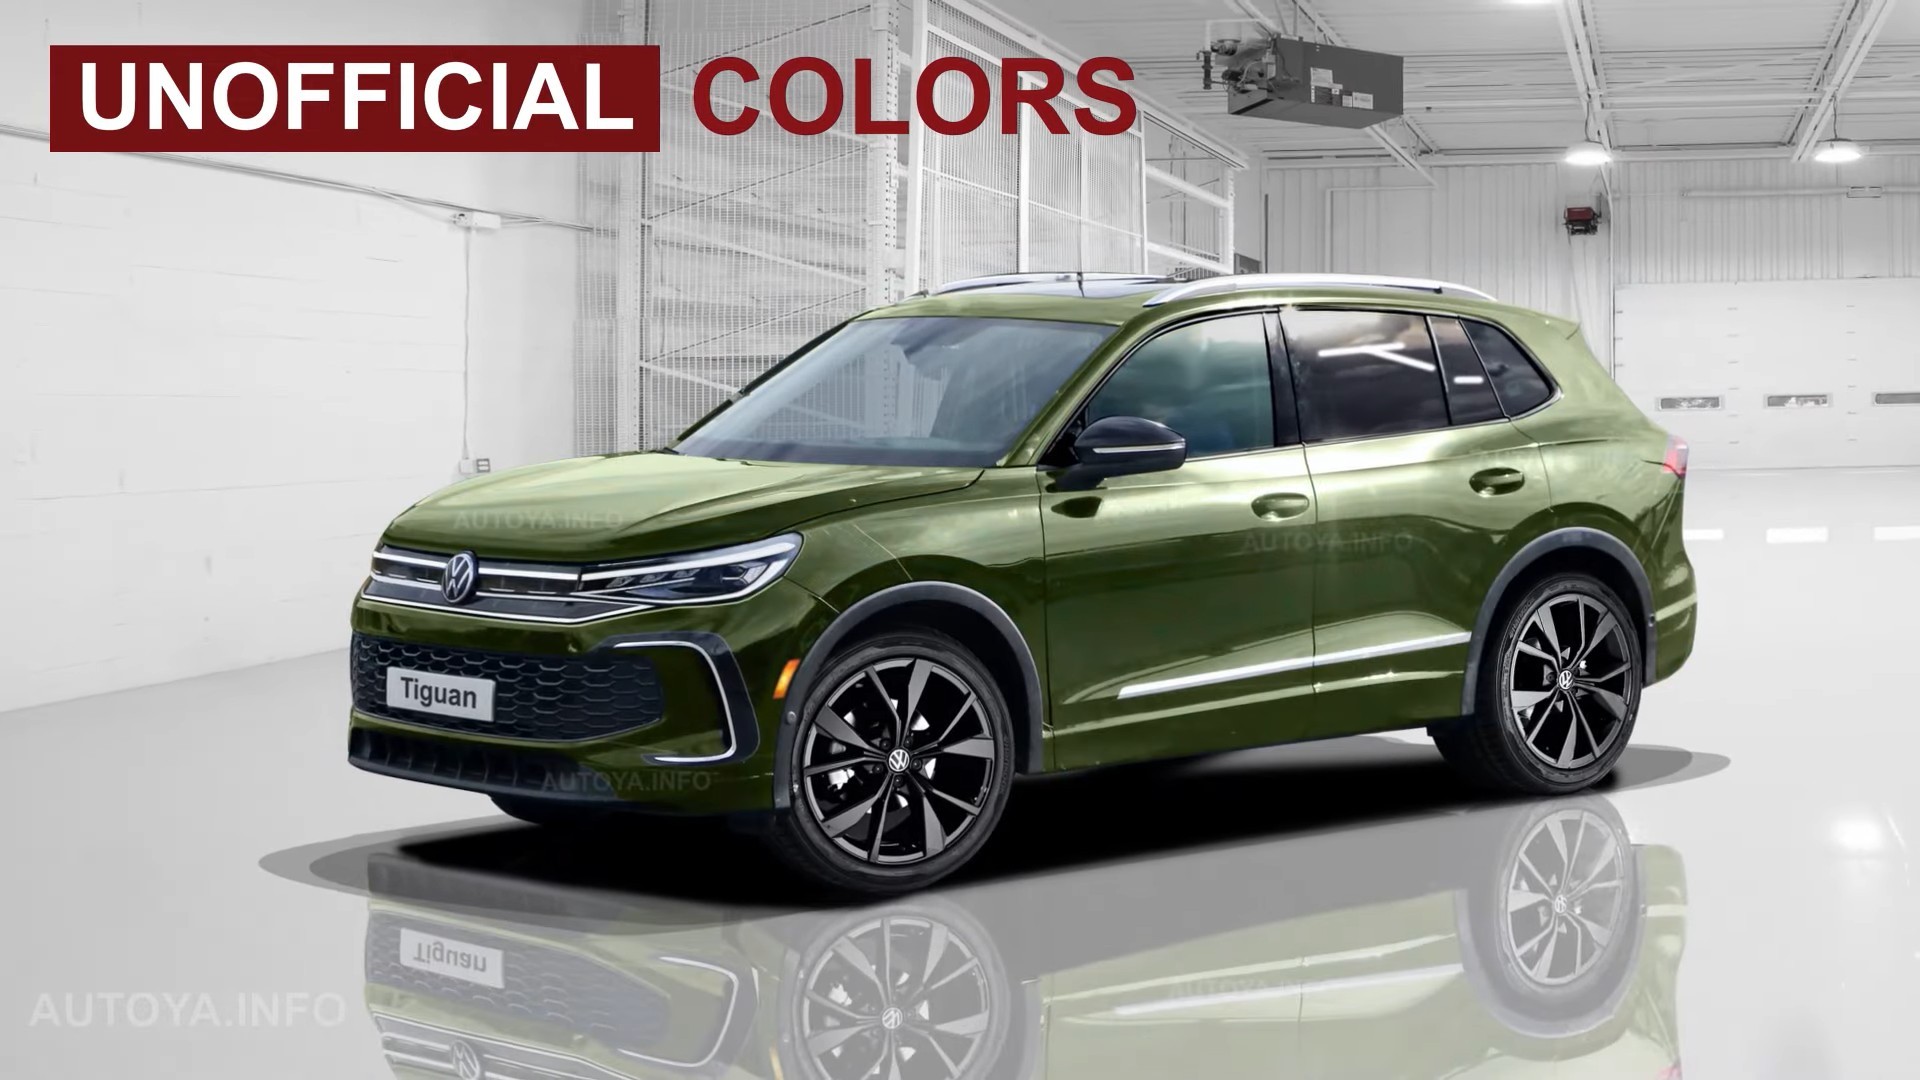 2024 VW Tiguan Mk3 Digitally Announced With Rich Color Palette, Inside and Out autoevolution